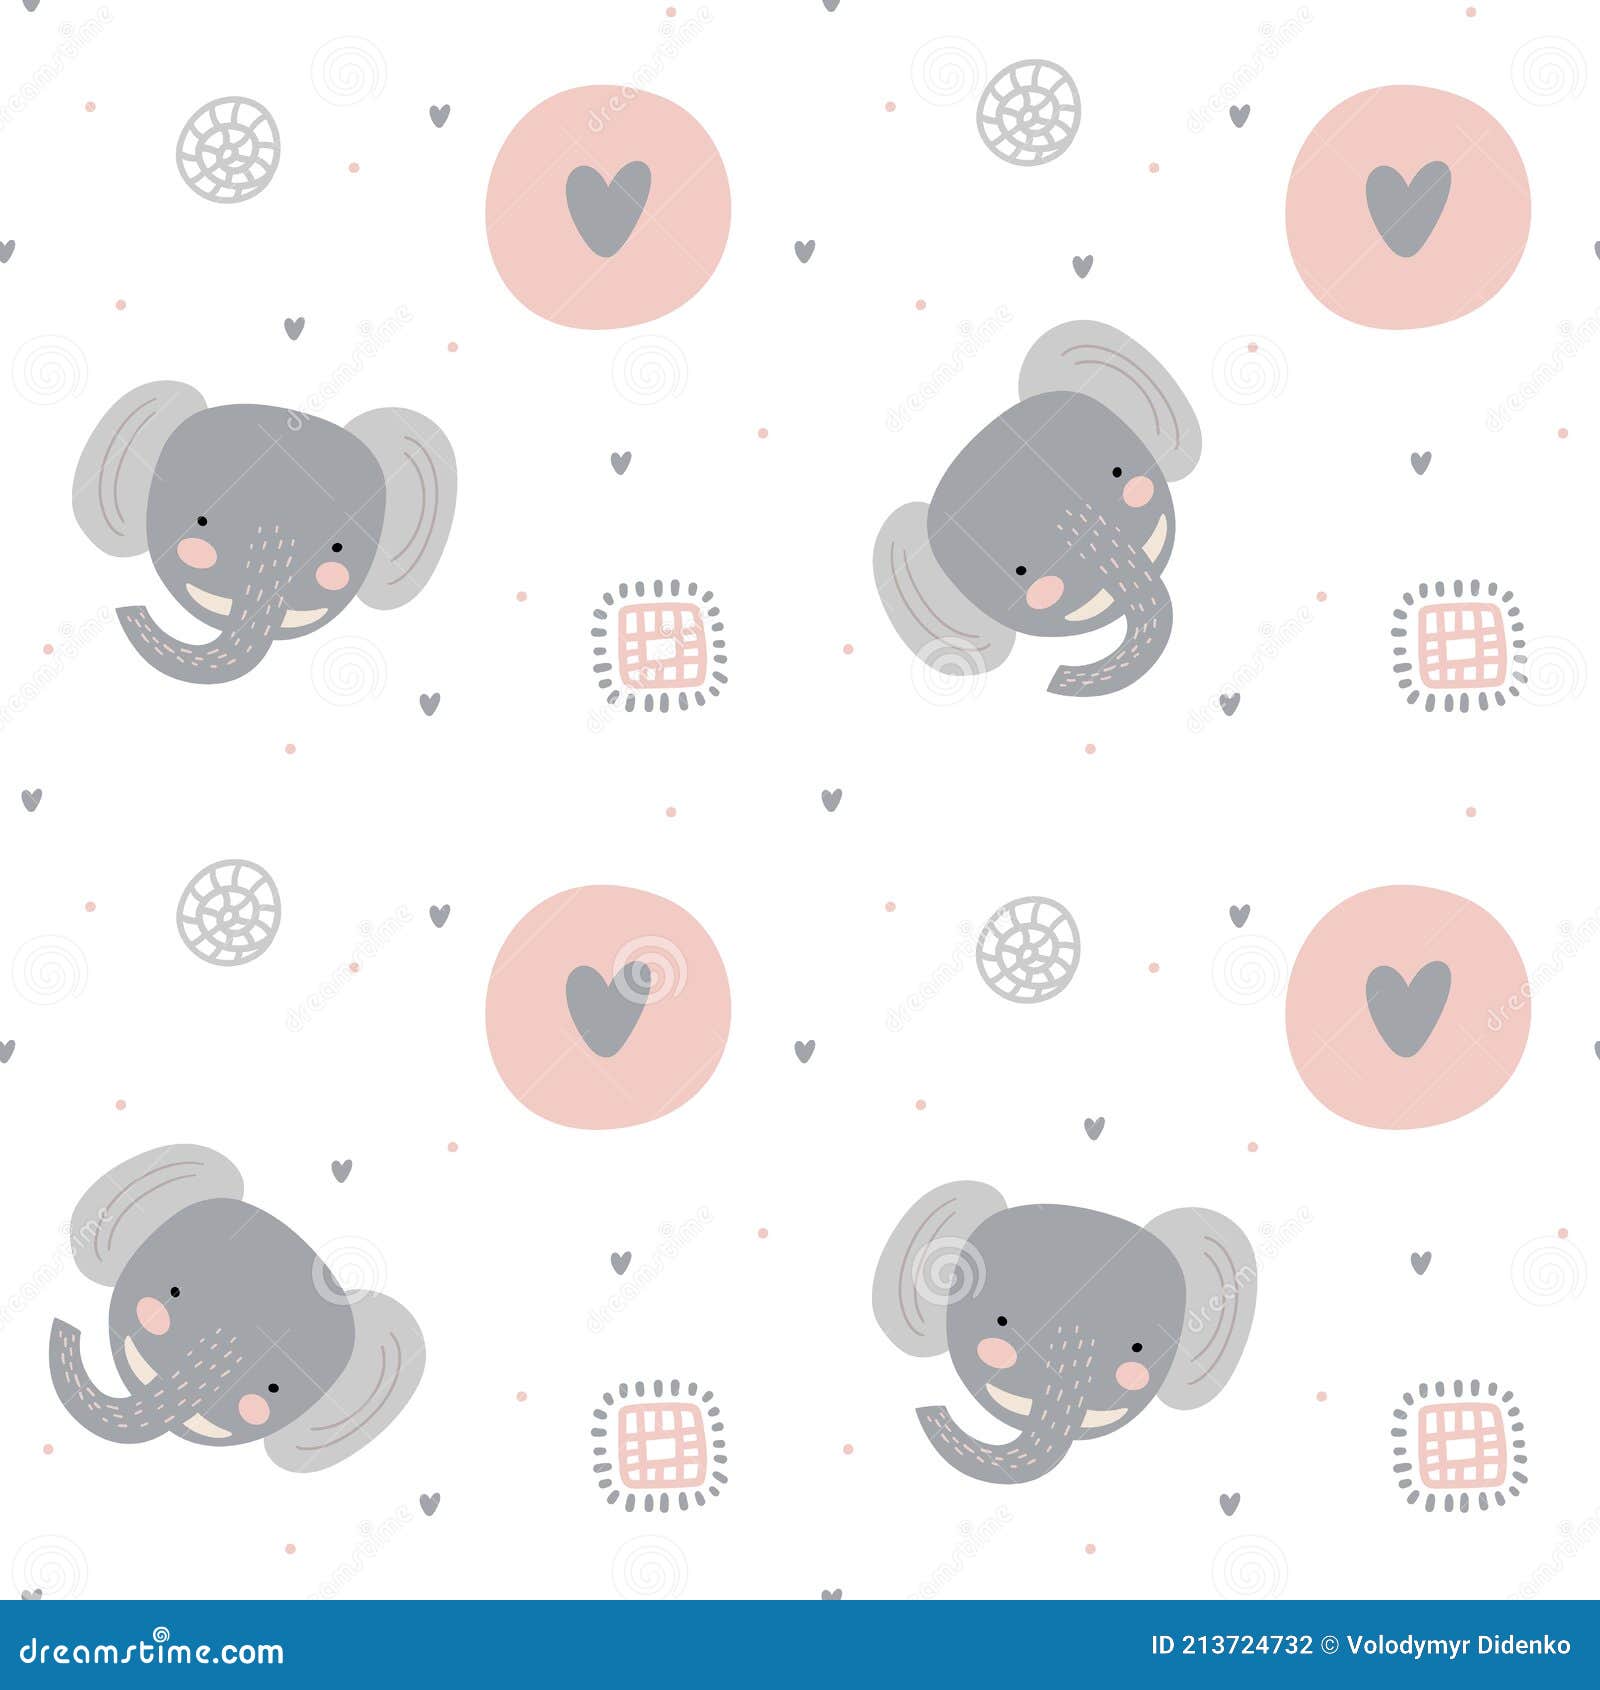 Funny Endless Hand Drawn Background with Cute Elephant, Dots and Hearts ...